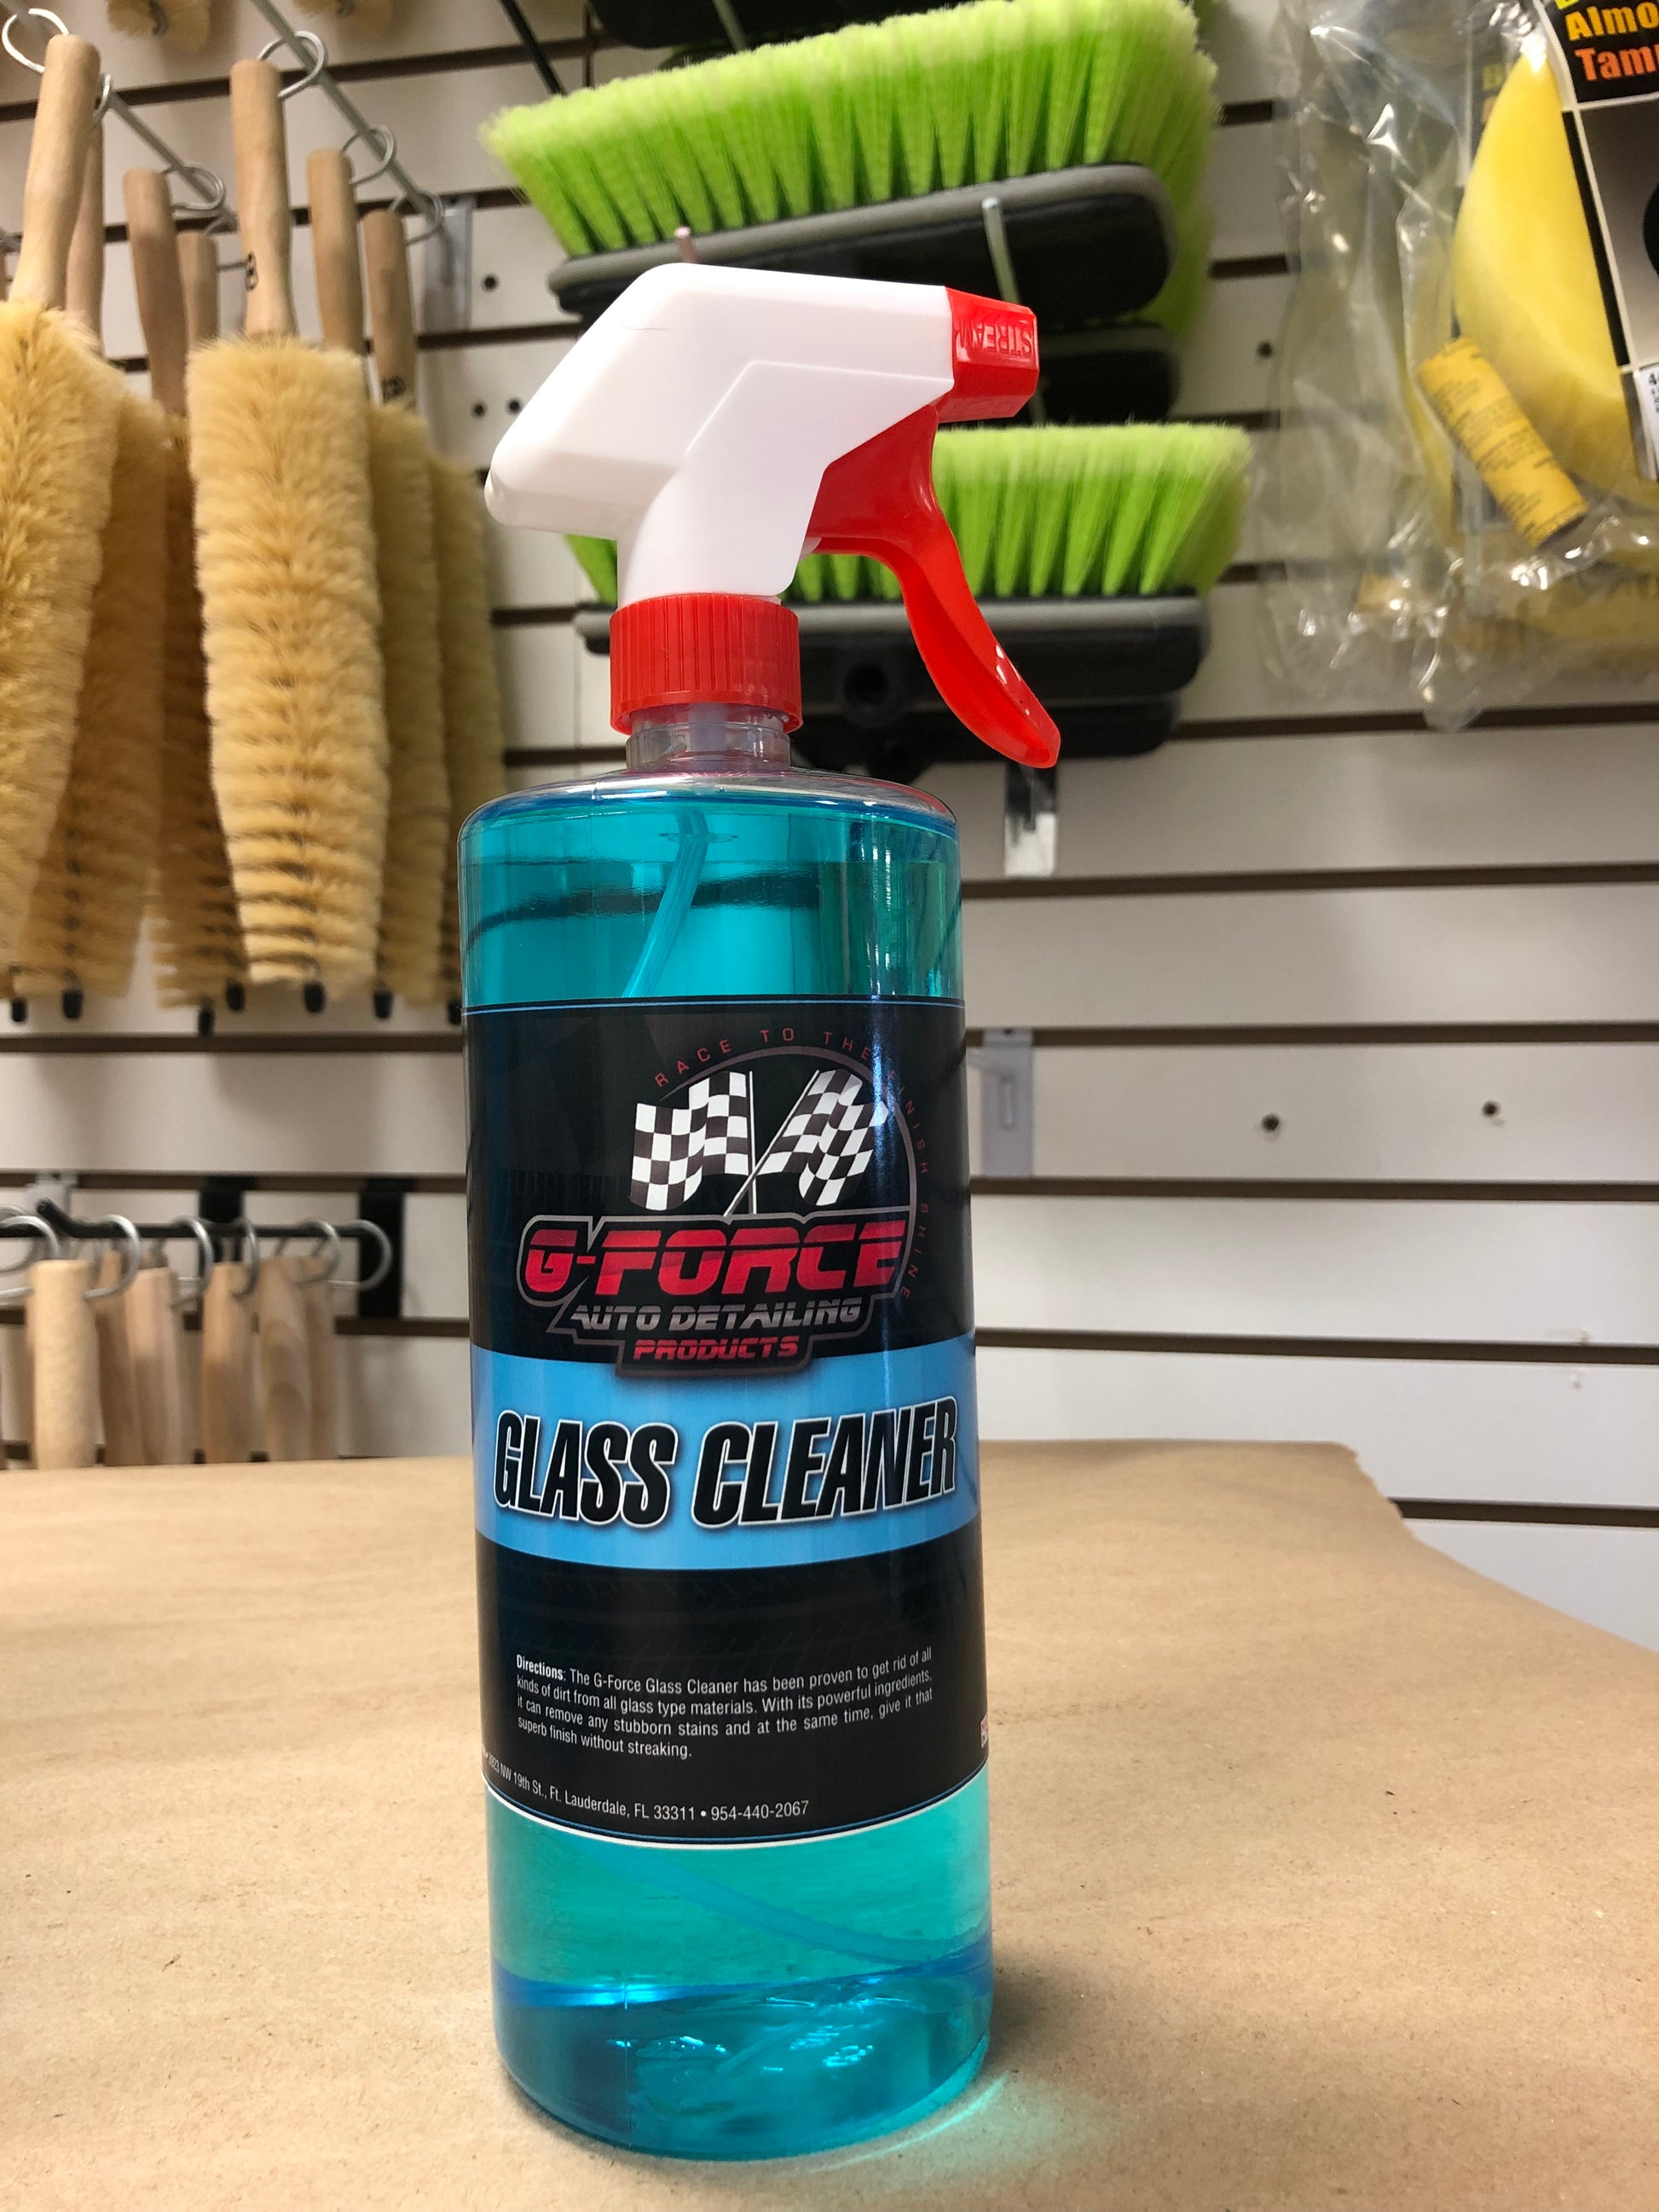 Auto Glass Cleaner